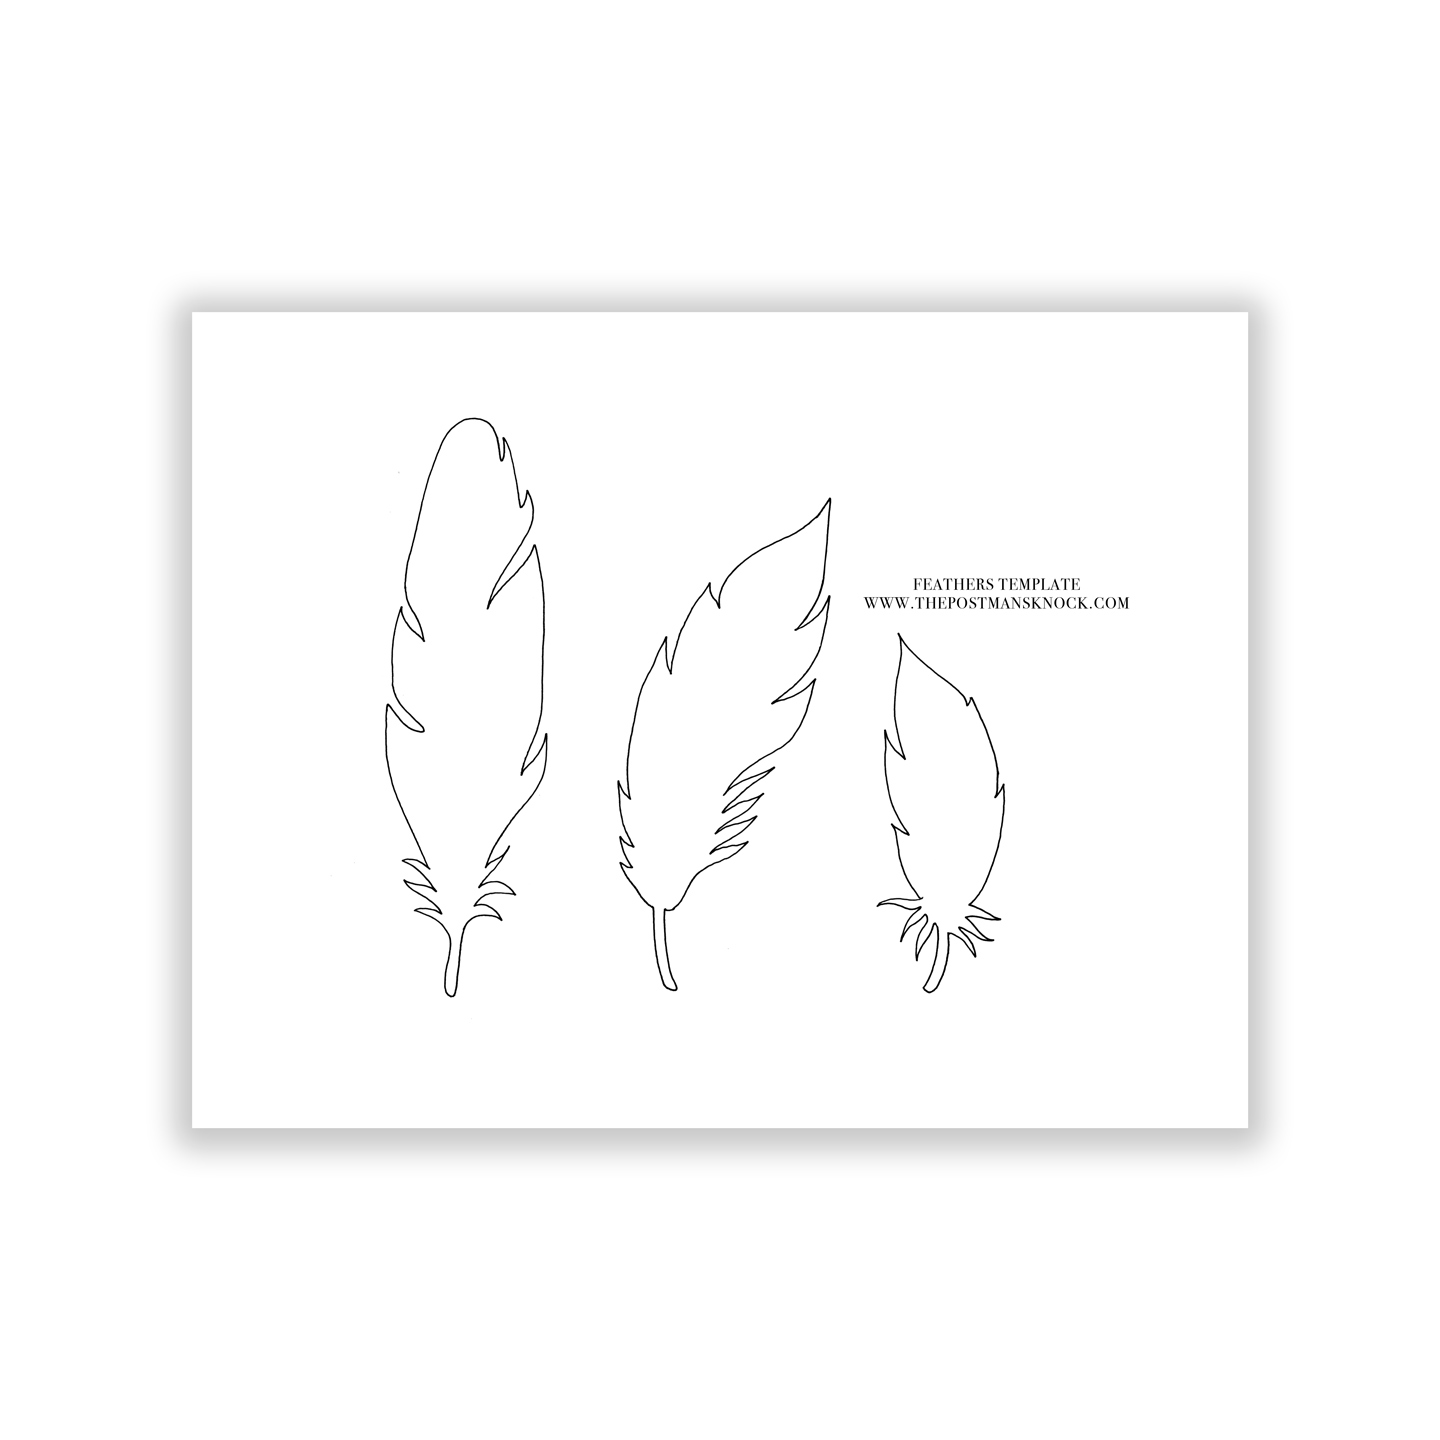 Paper Feathers Template The Postman's Knock